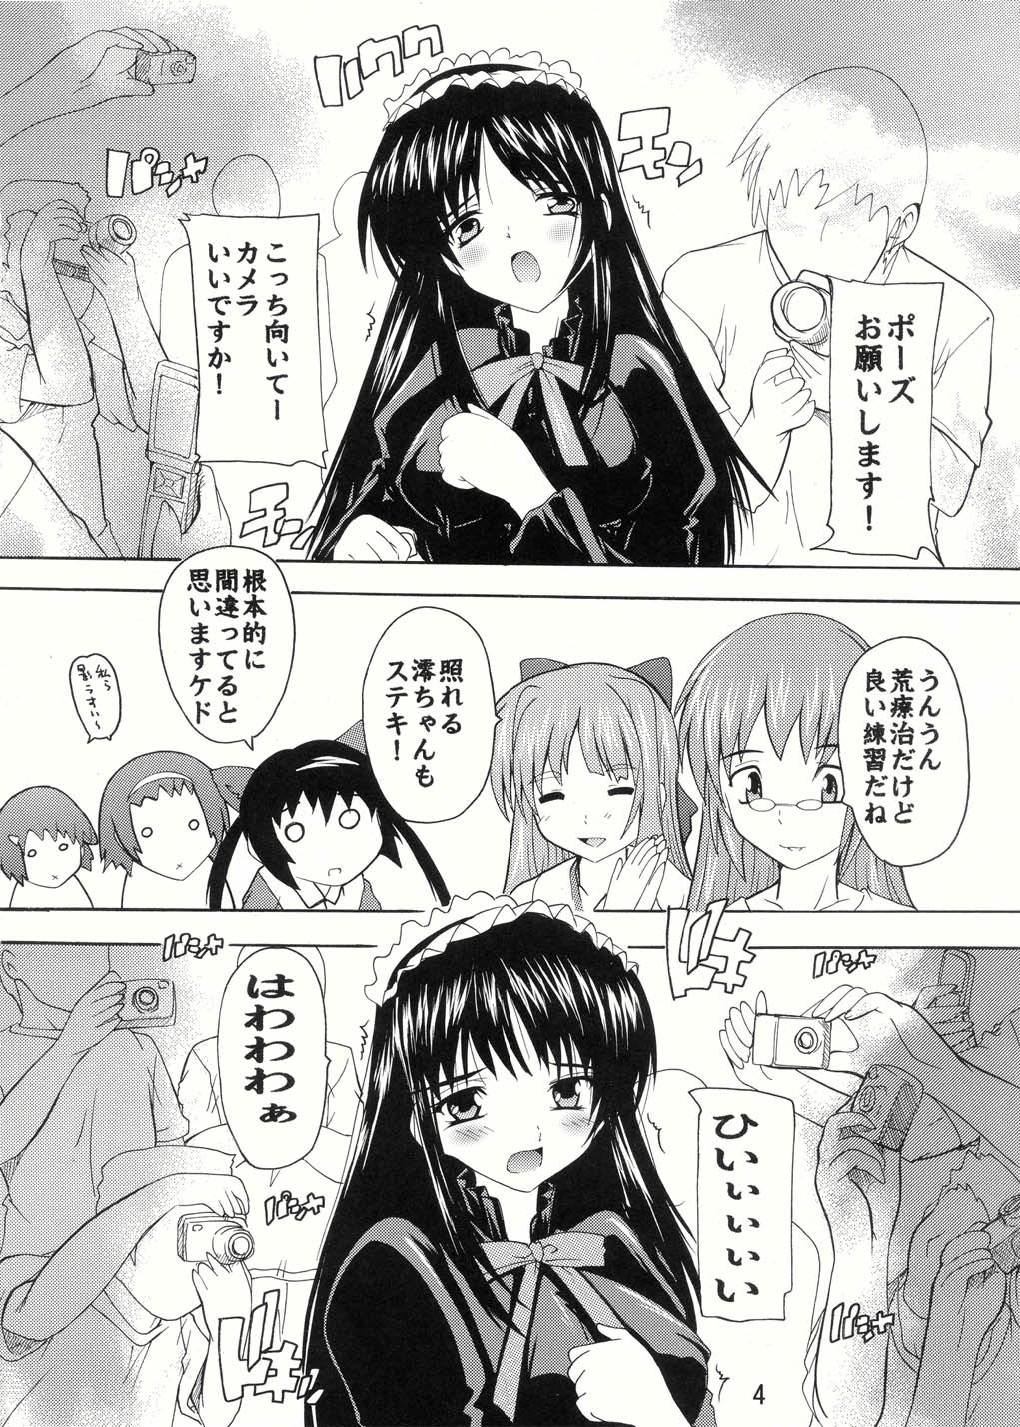 Cfnm Ryoujoku Mio Special - K on Yanks Featured - Page 4